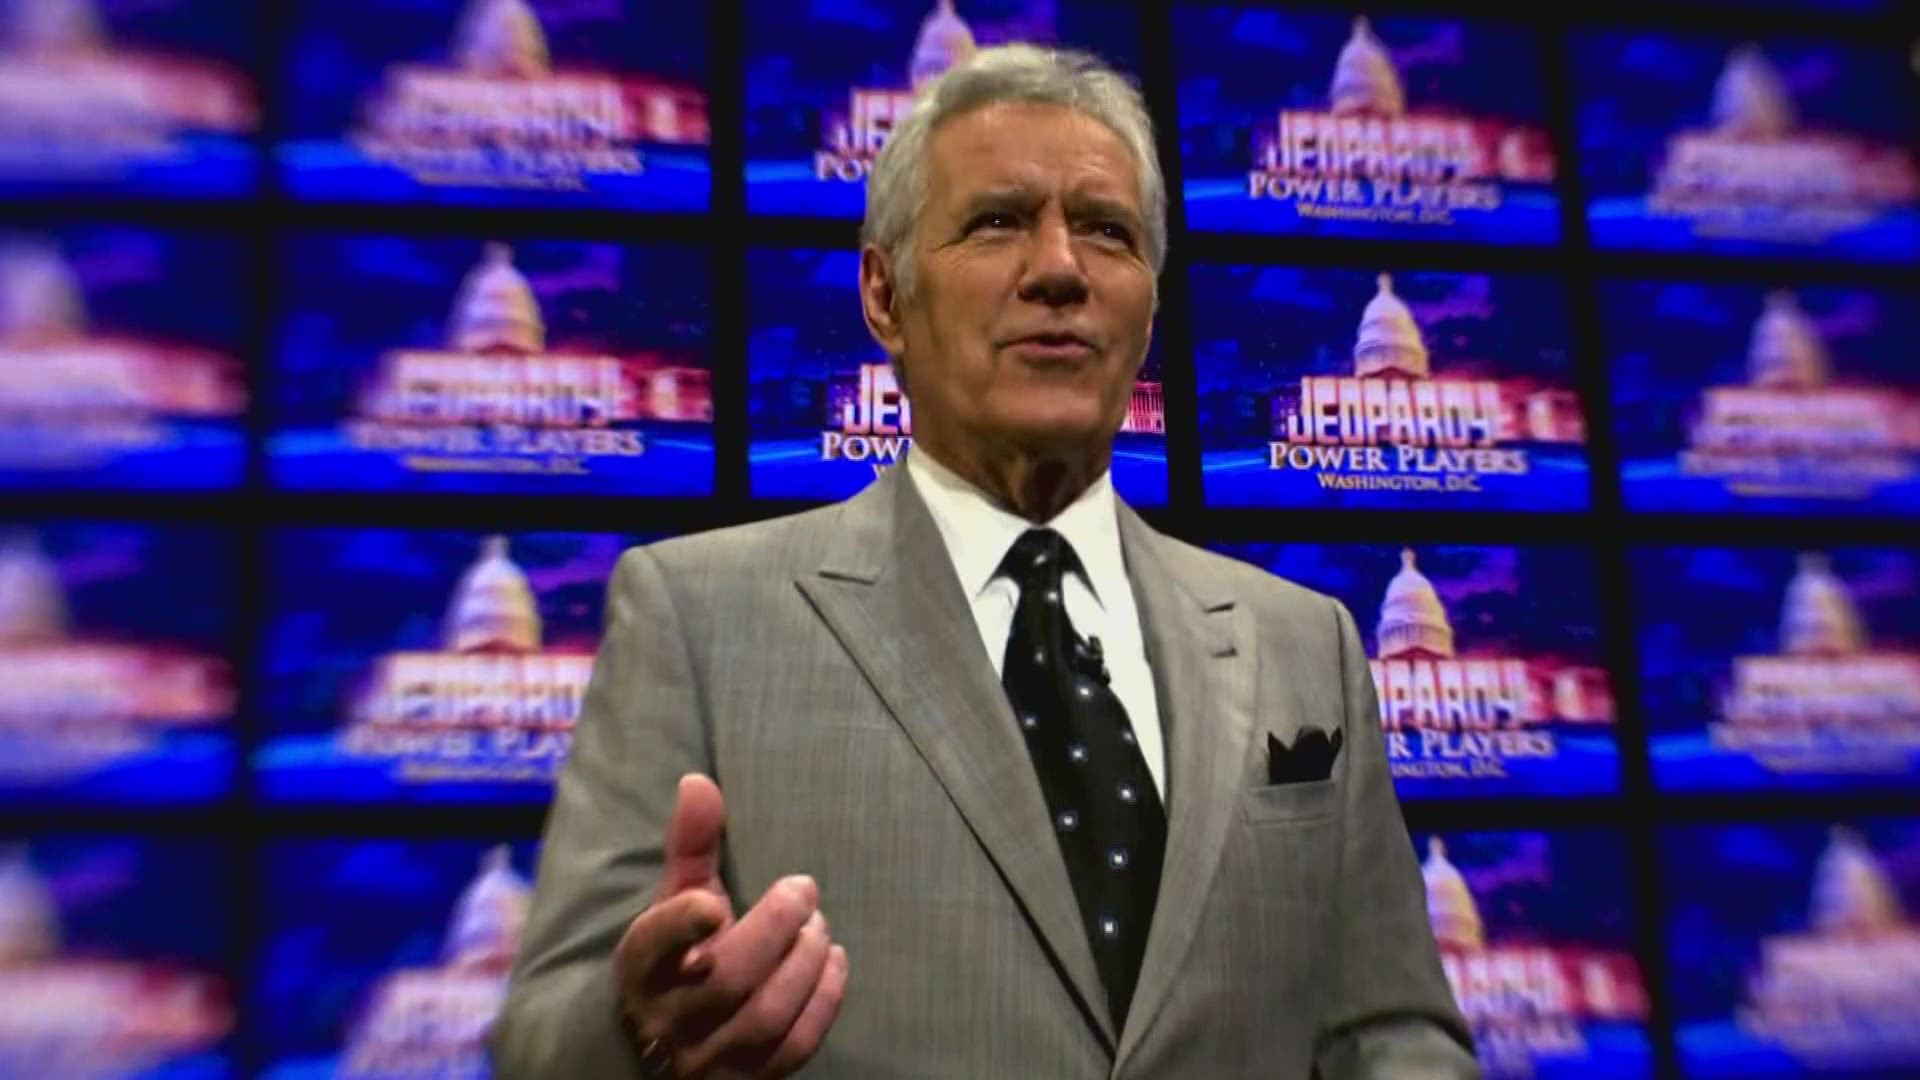 Iconic Jeopardy host, Alex Trebek, passed away over the weekend.